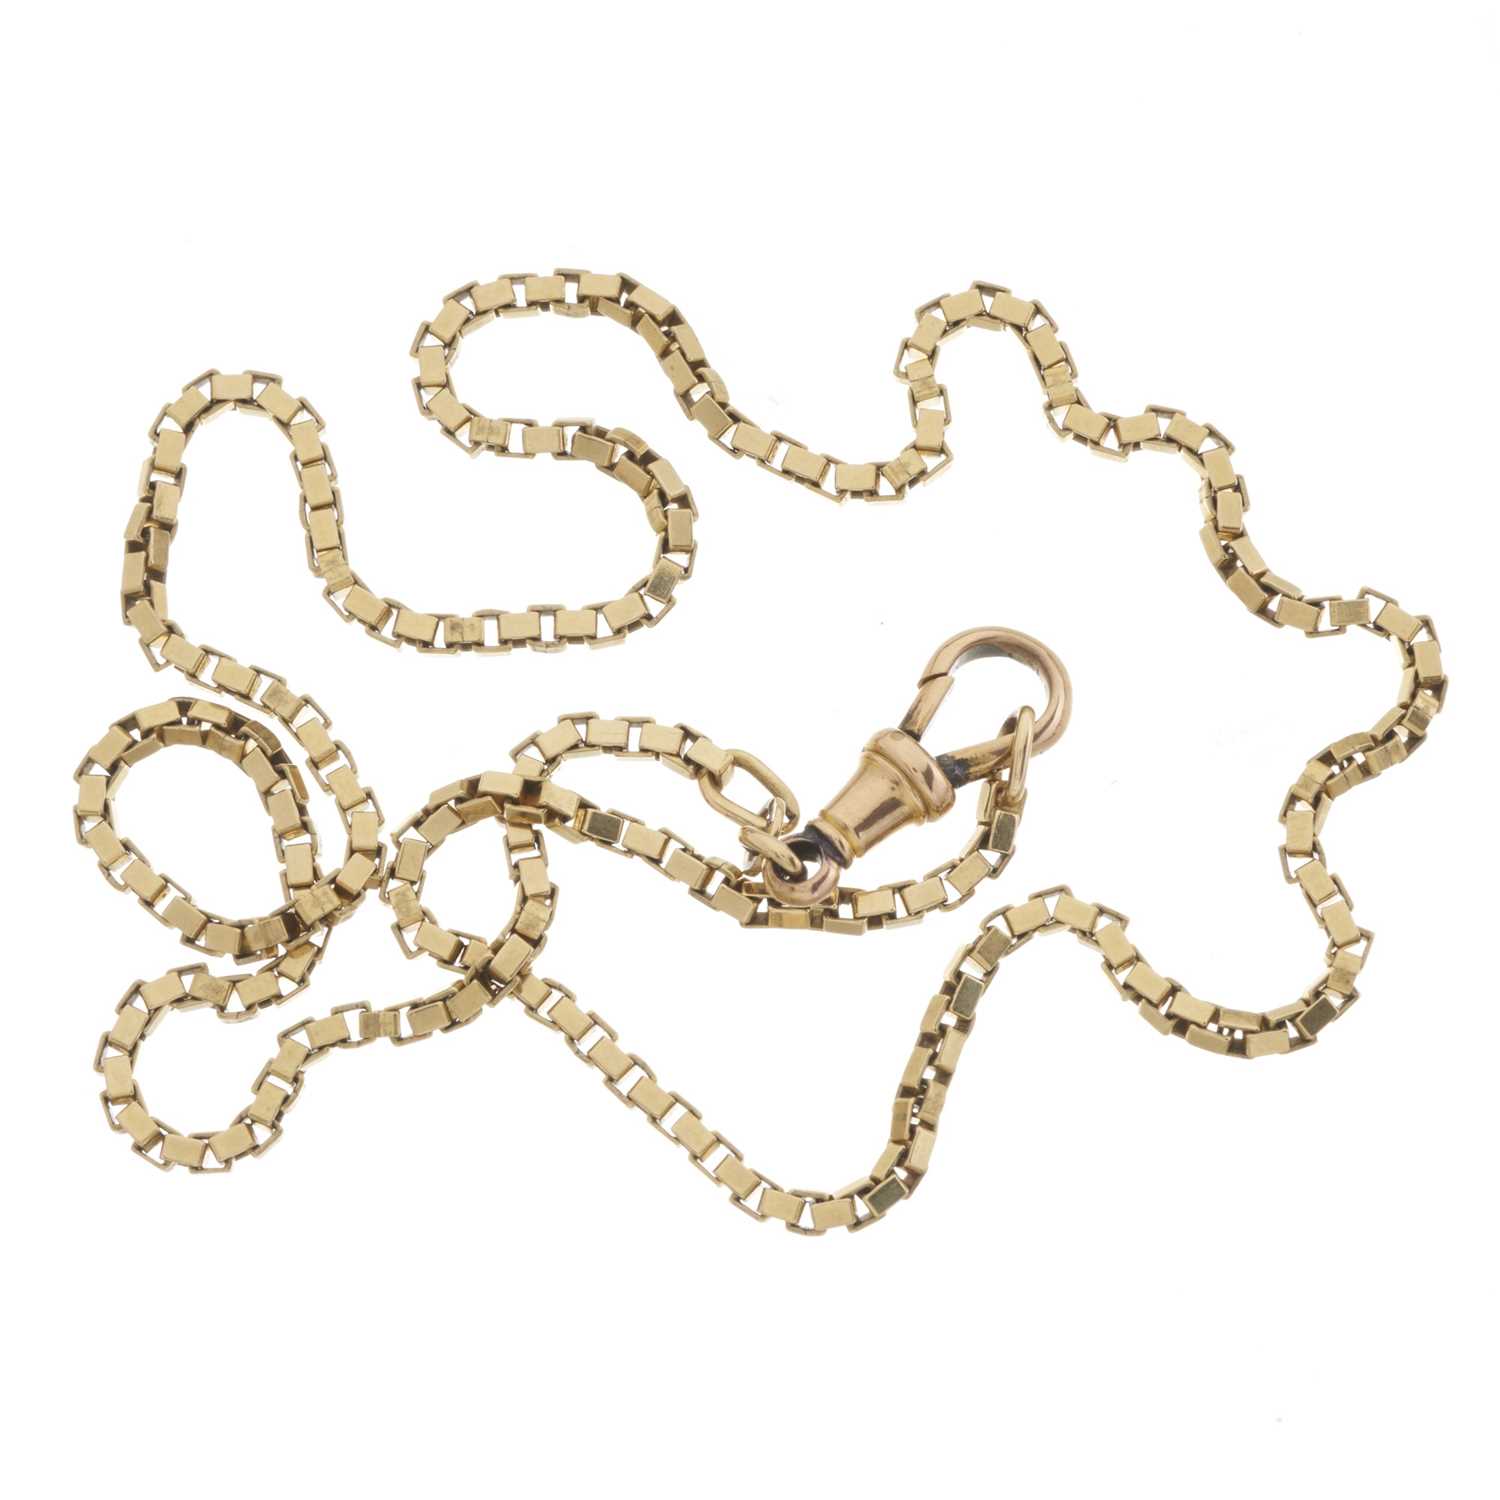 A 9ct gold box-link chain necklace - Image 2 of 2